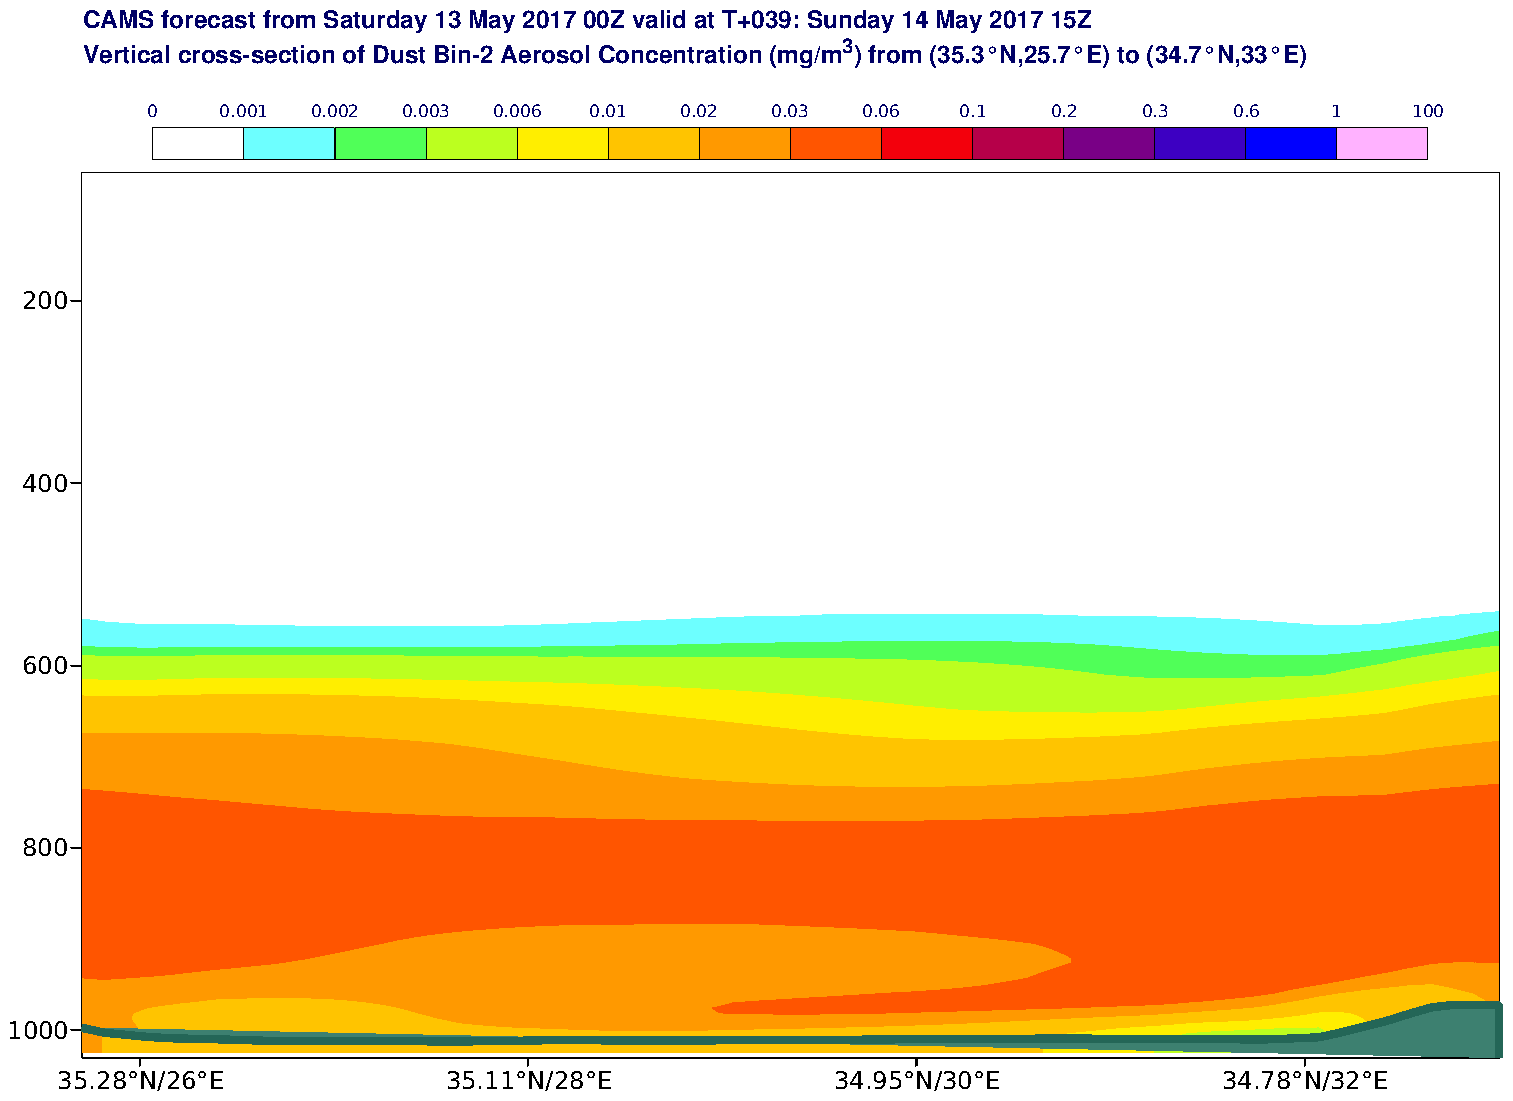 Vertical cross-section of Dust Bin-2 Aerosol Concentration (mg/m3) valid at T39 - 2017-05-14 15:00